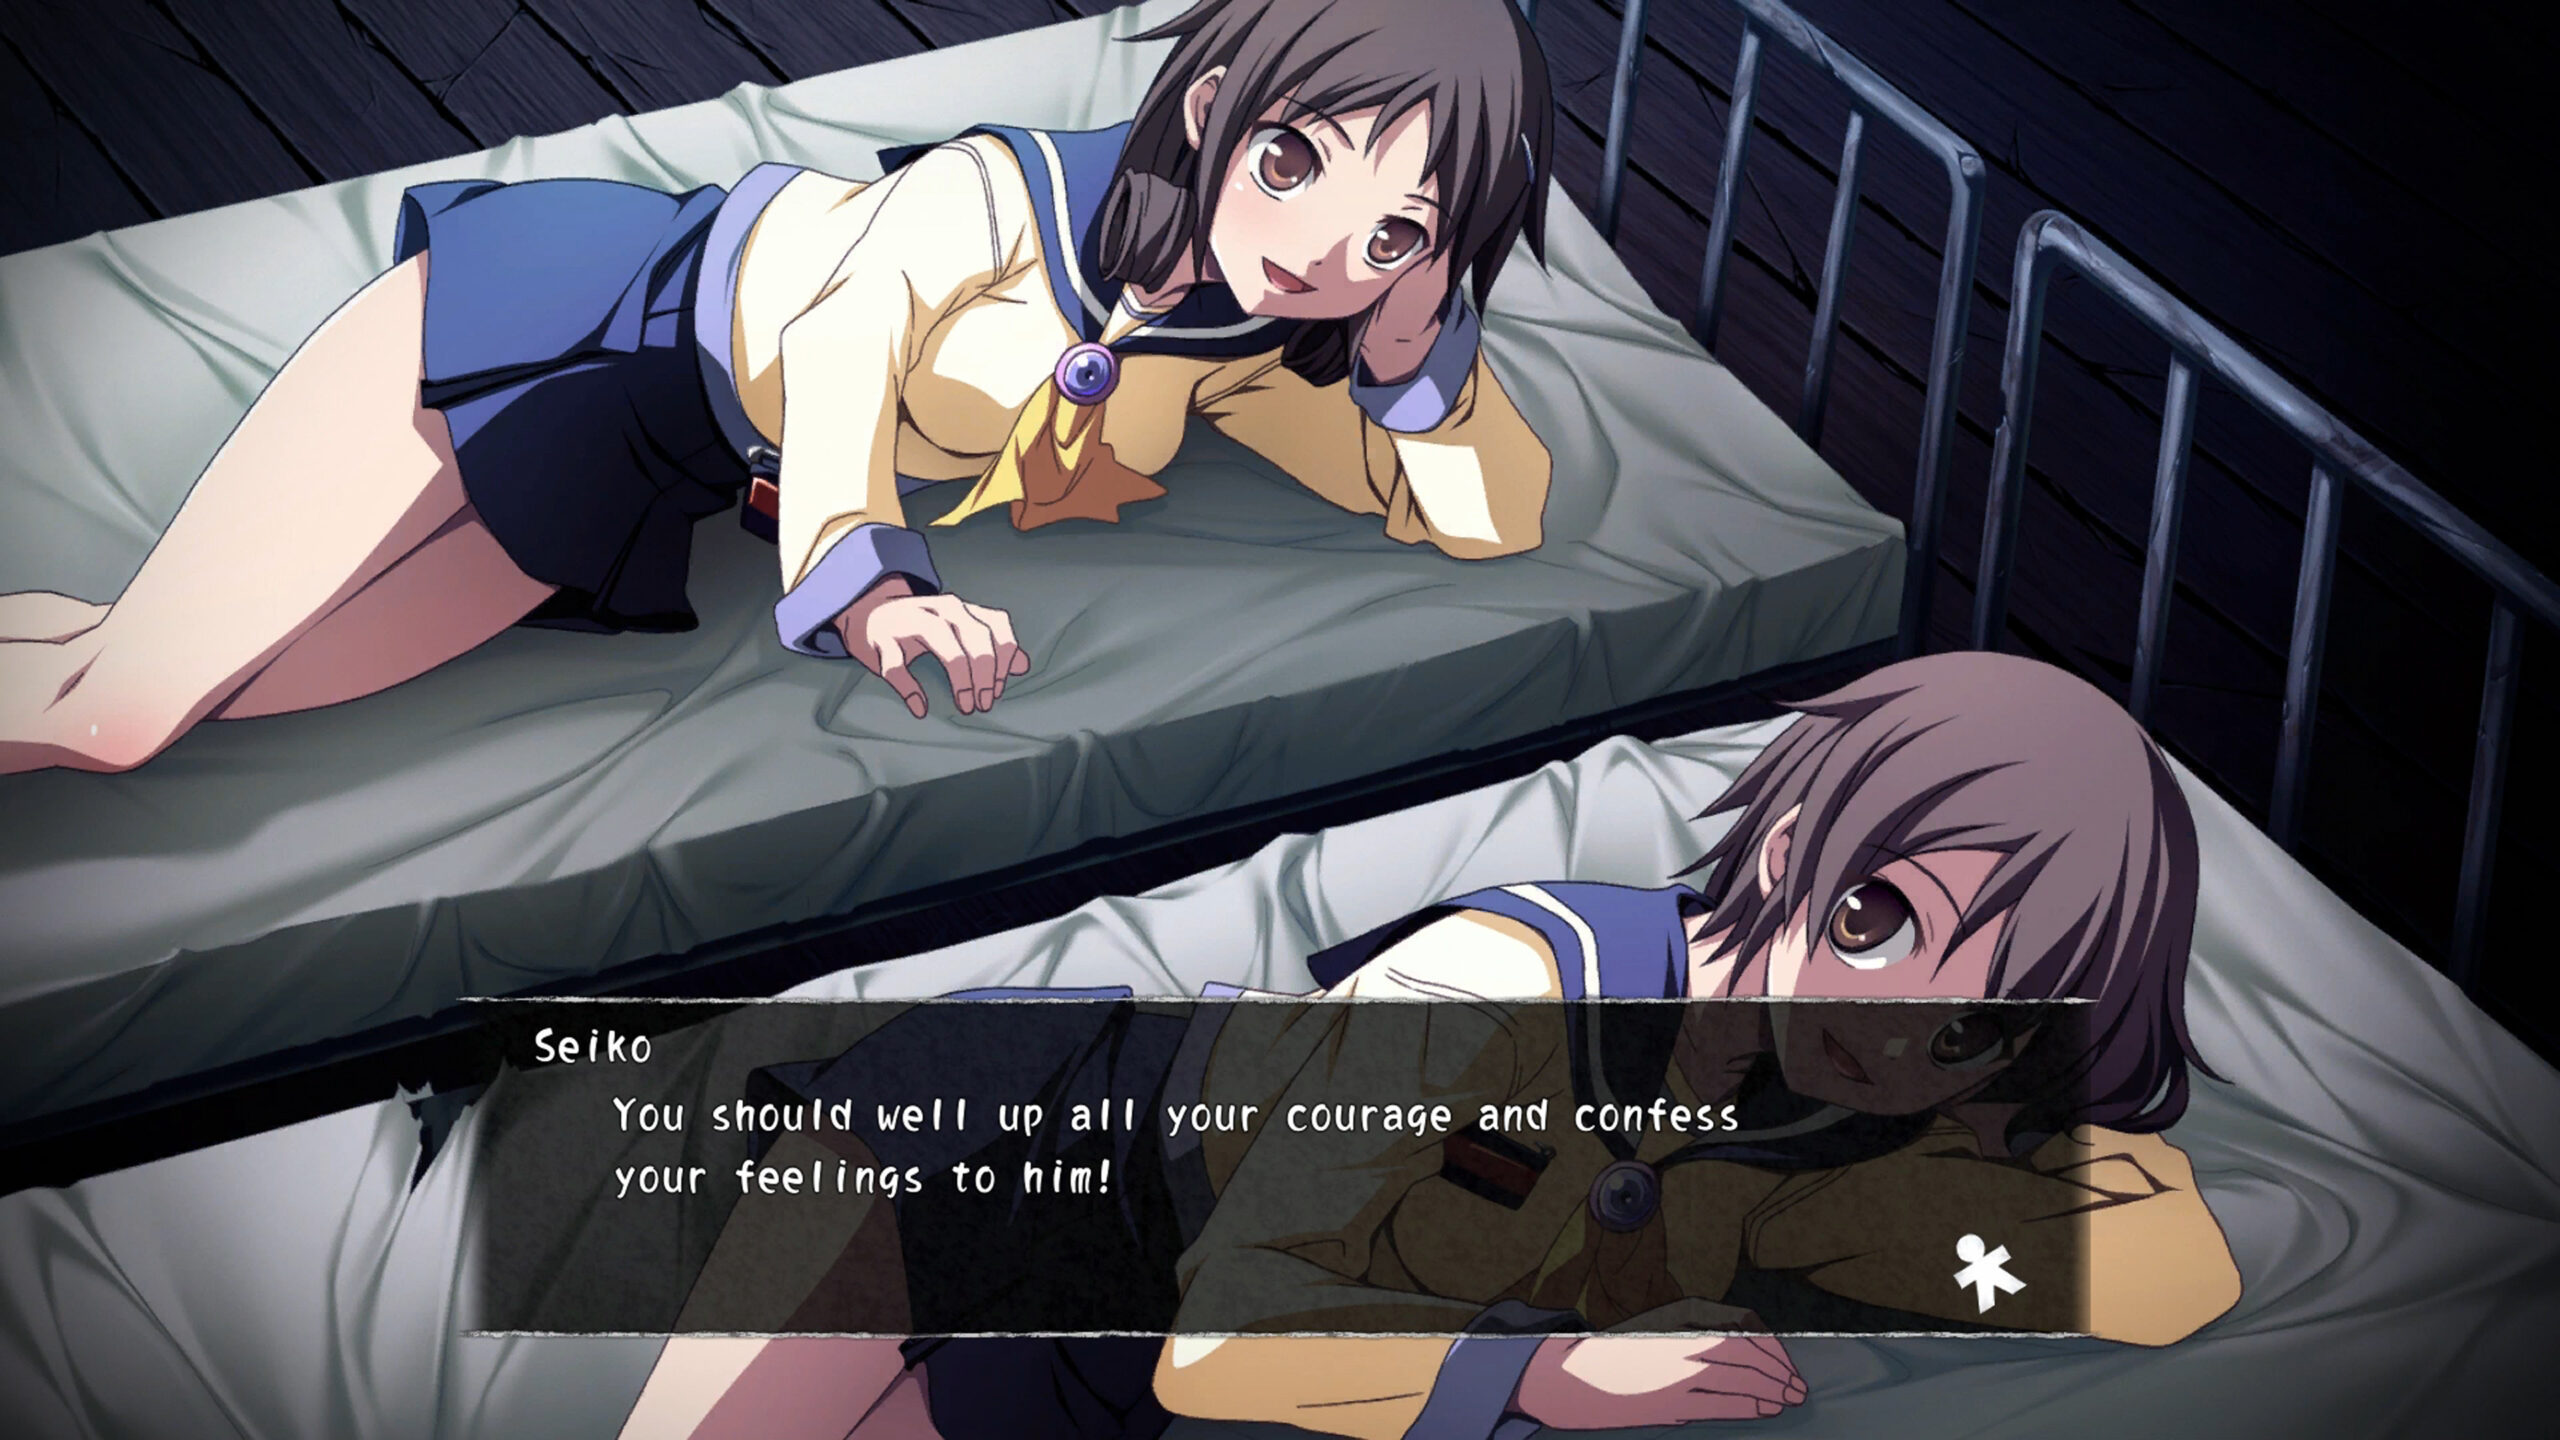 Crunchyroll - Enhanced Corpse Party Hits PC and Consoles in the West on  October 20